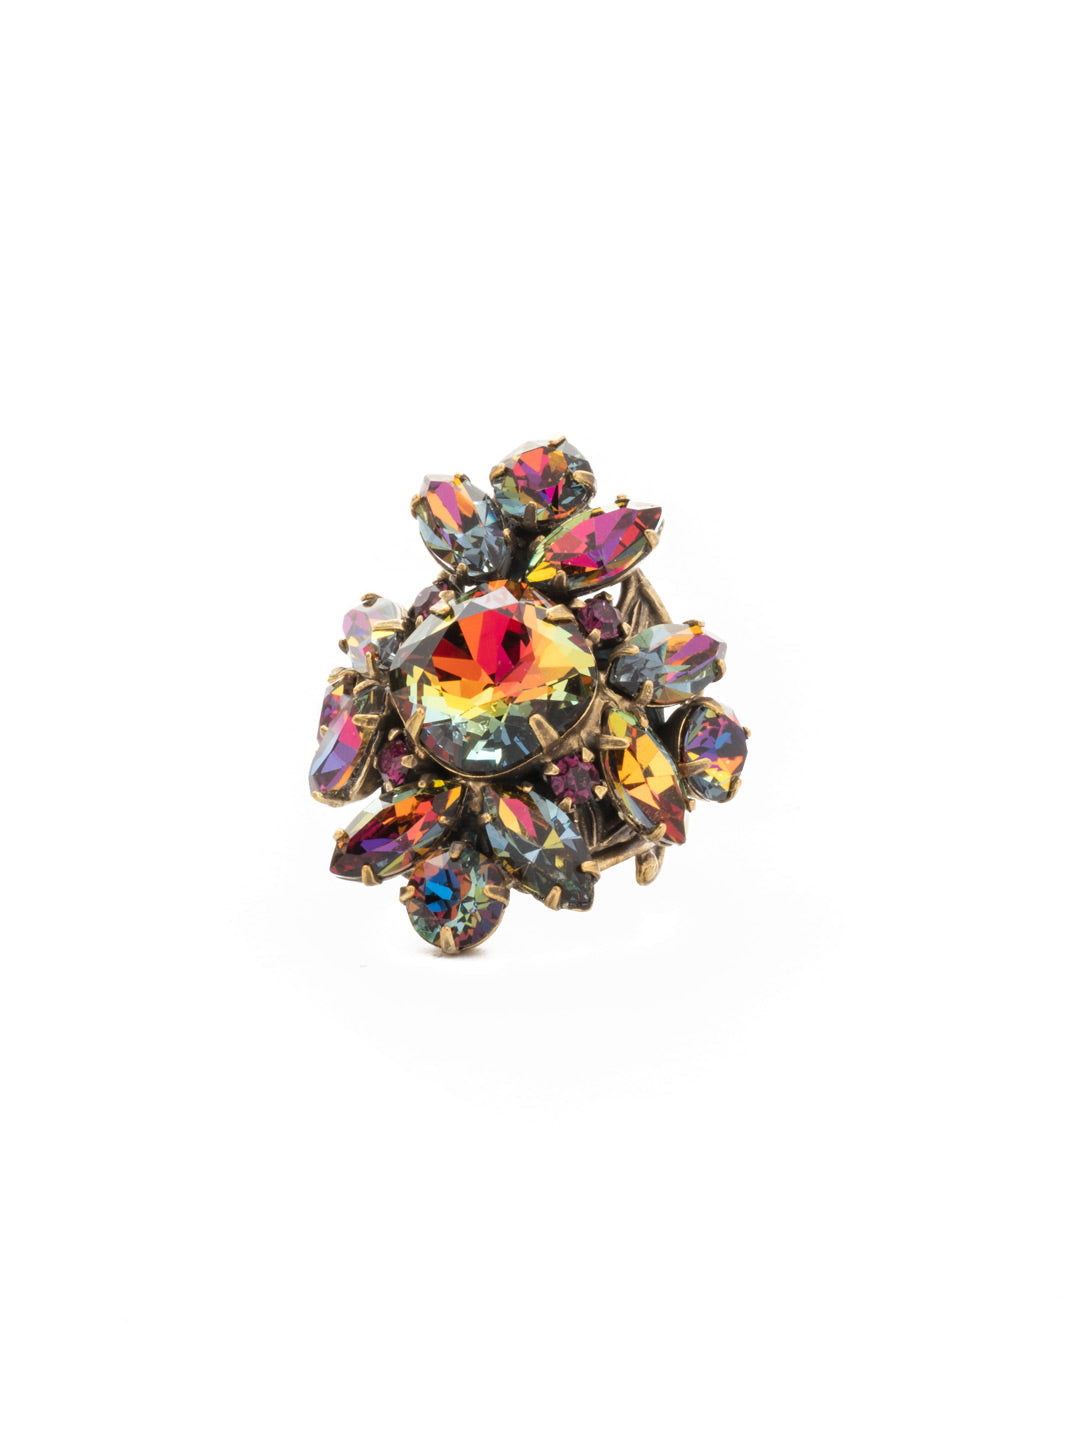 Floral Crystal Cluster Cocktail Ring - RCR62AGVO - Grab attention with this gem-packed ring. The details will have everyone swooning!